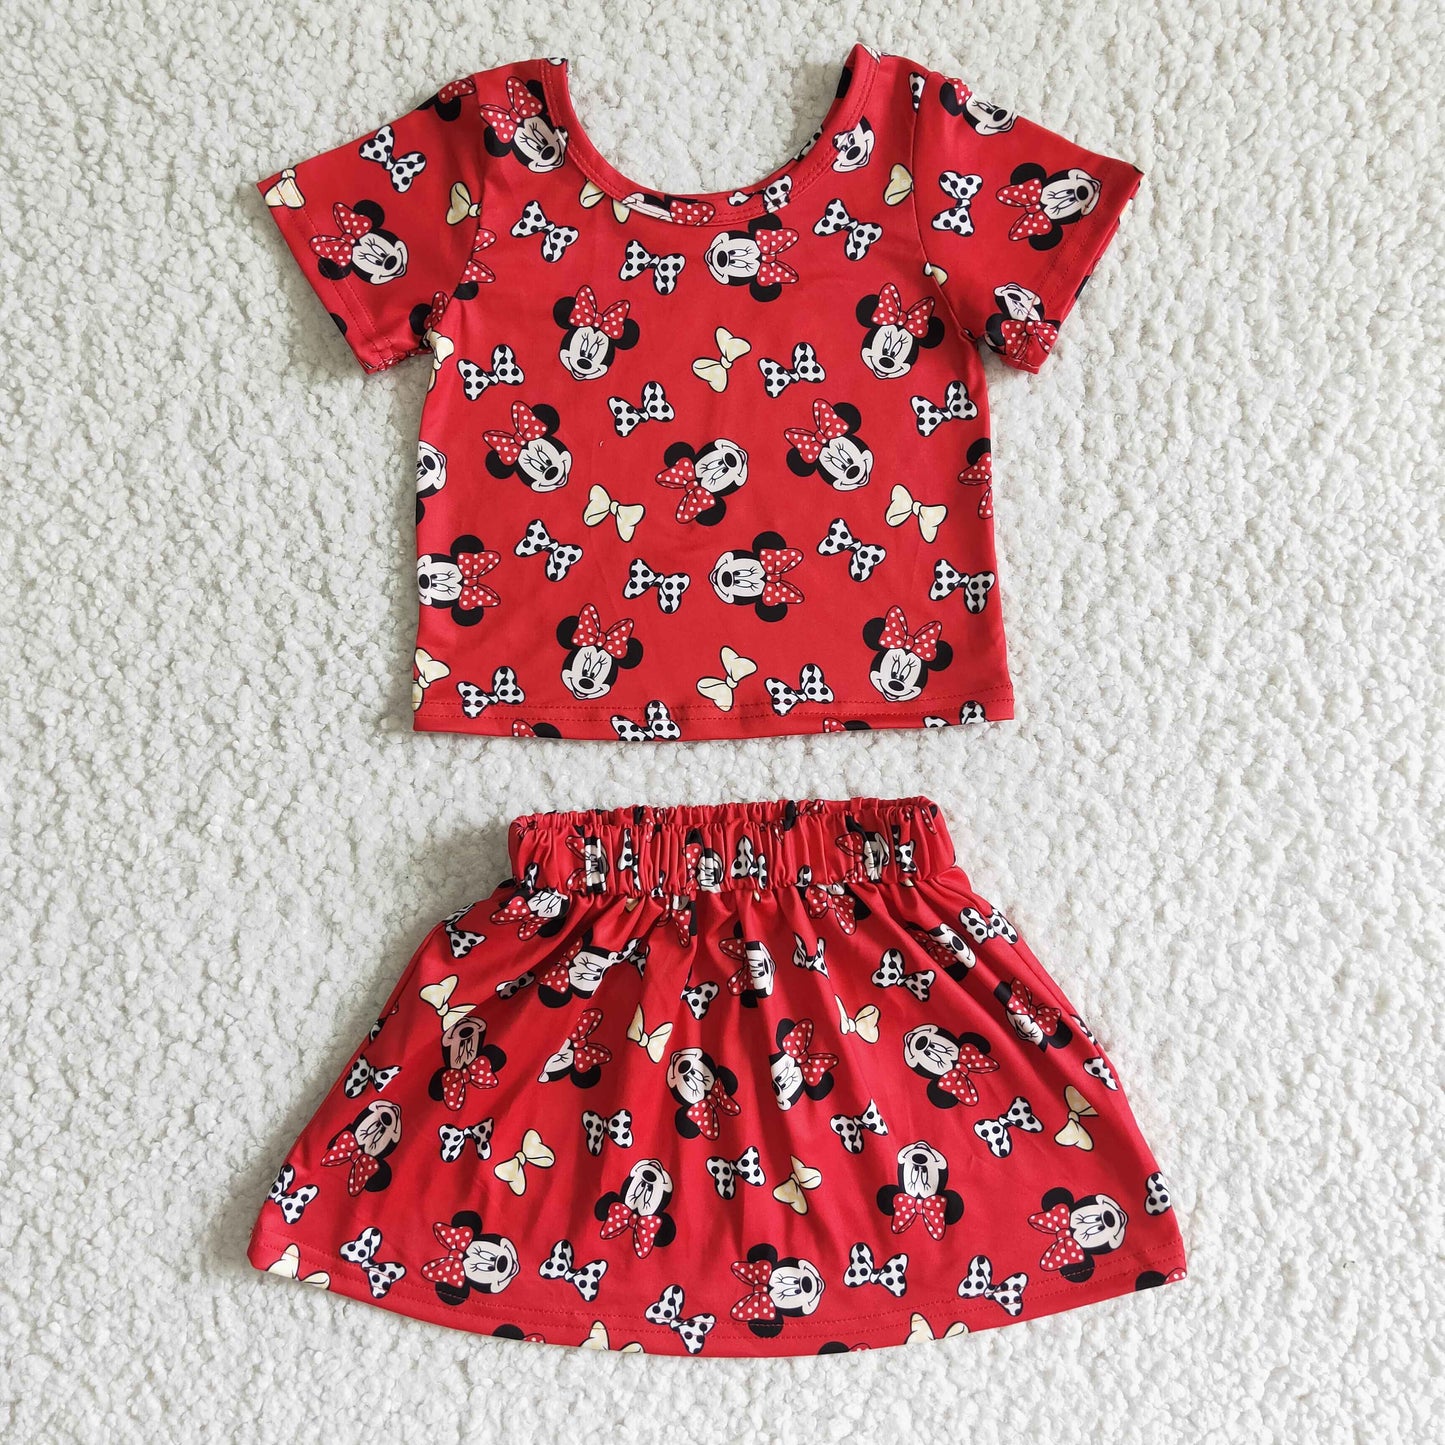 Red short sleeve mouse shirt skirt cute girls outfits